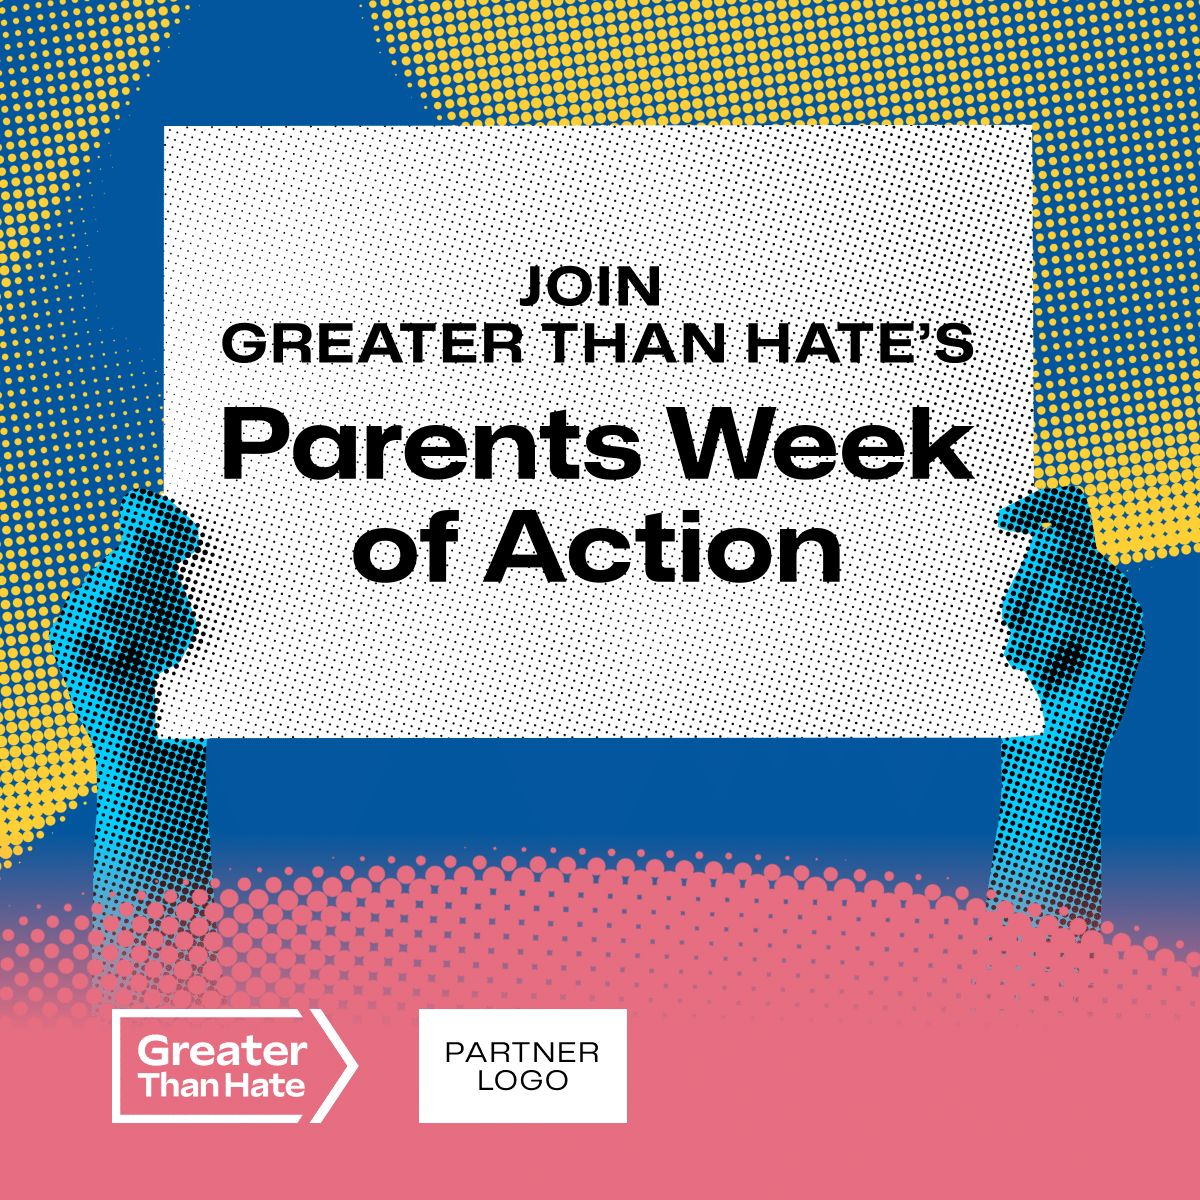 Join Greater than Hate's Parents Week of Action